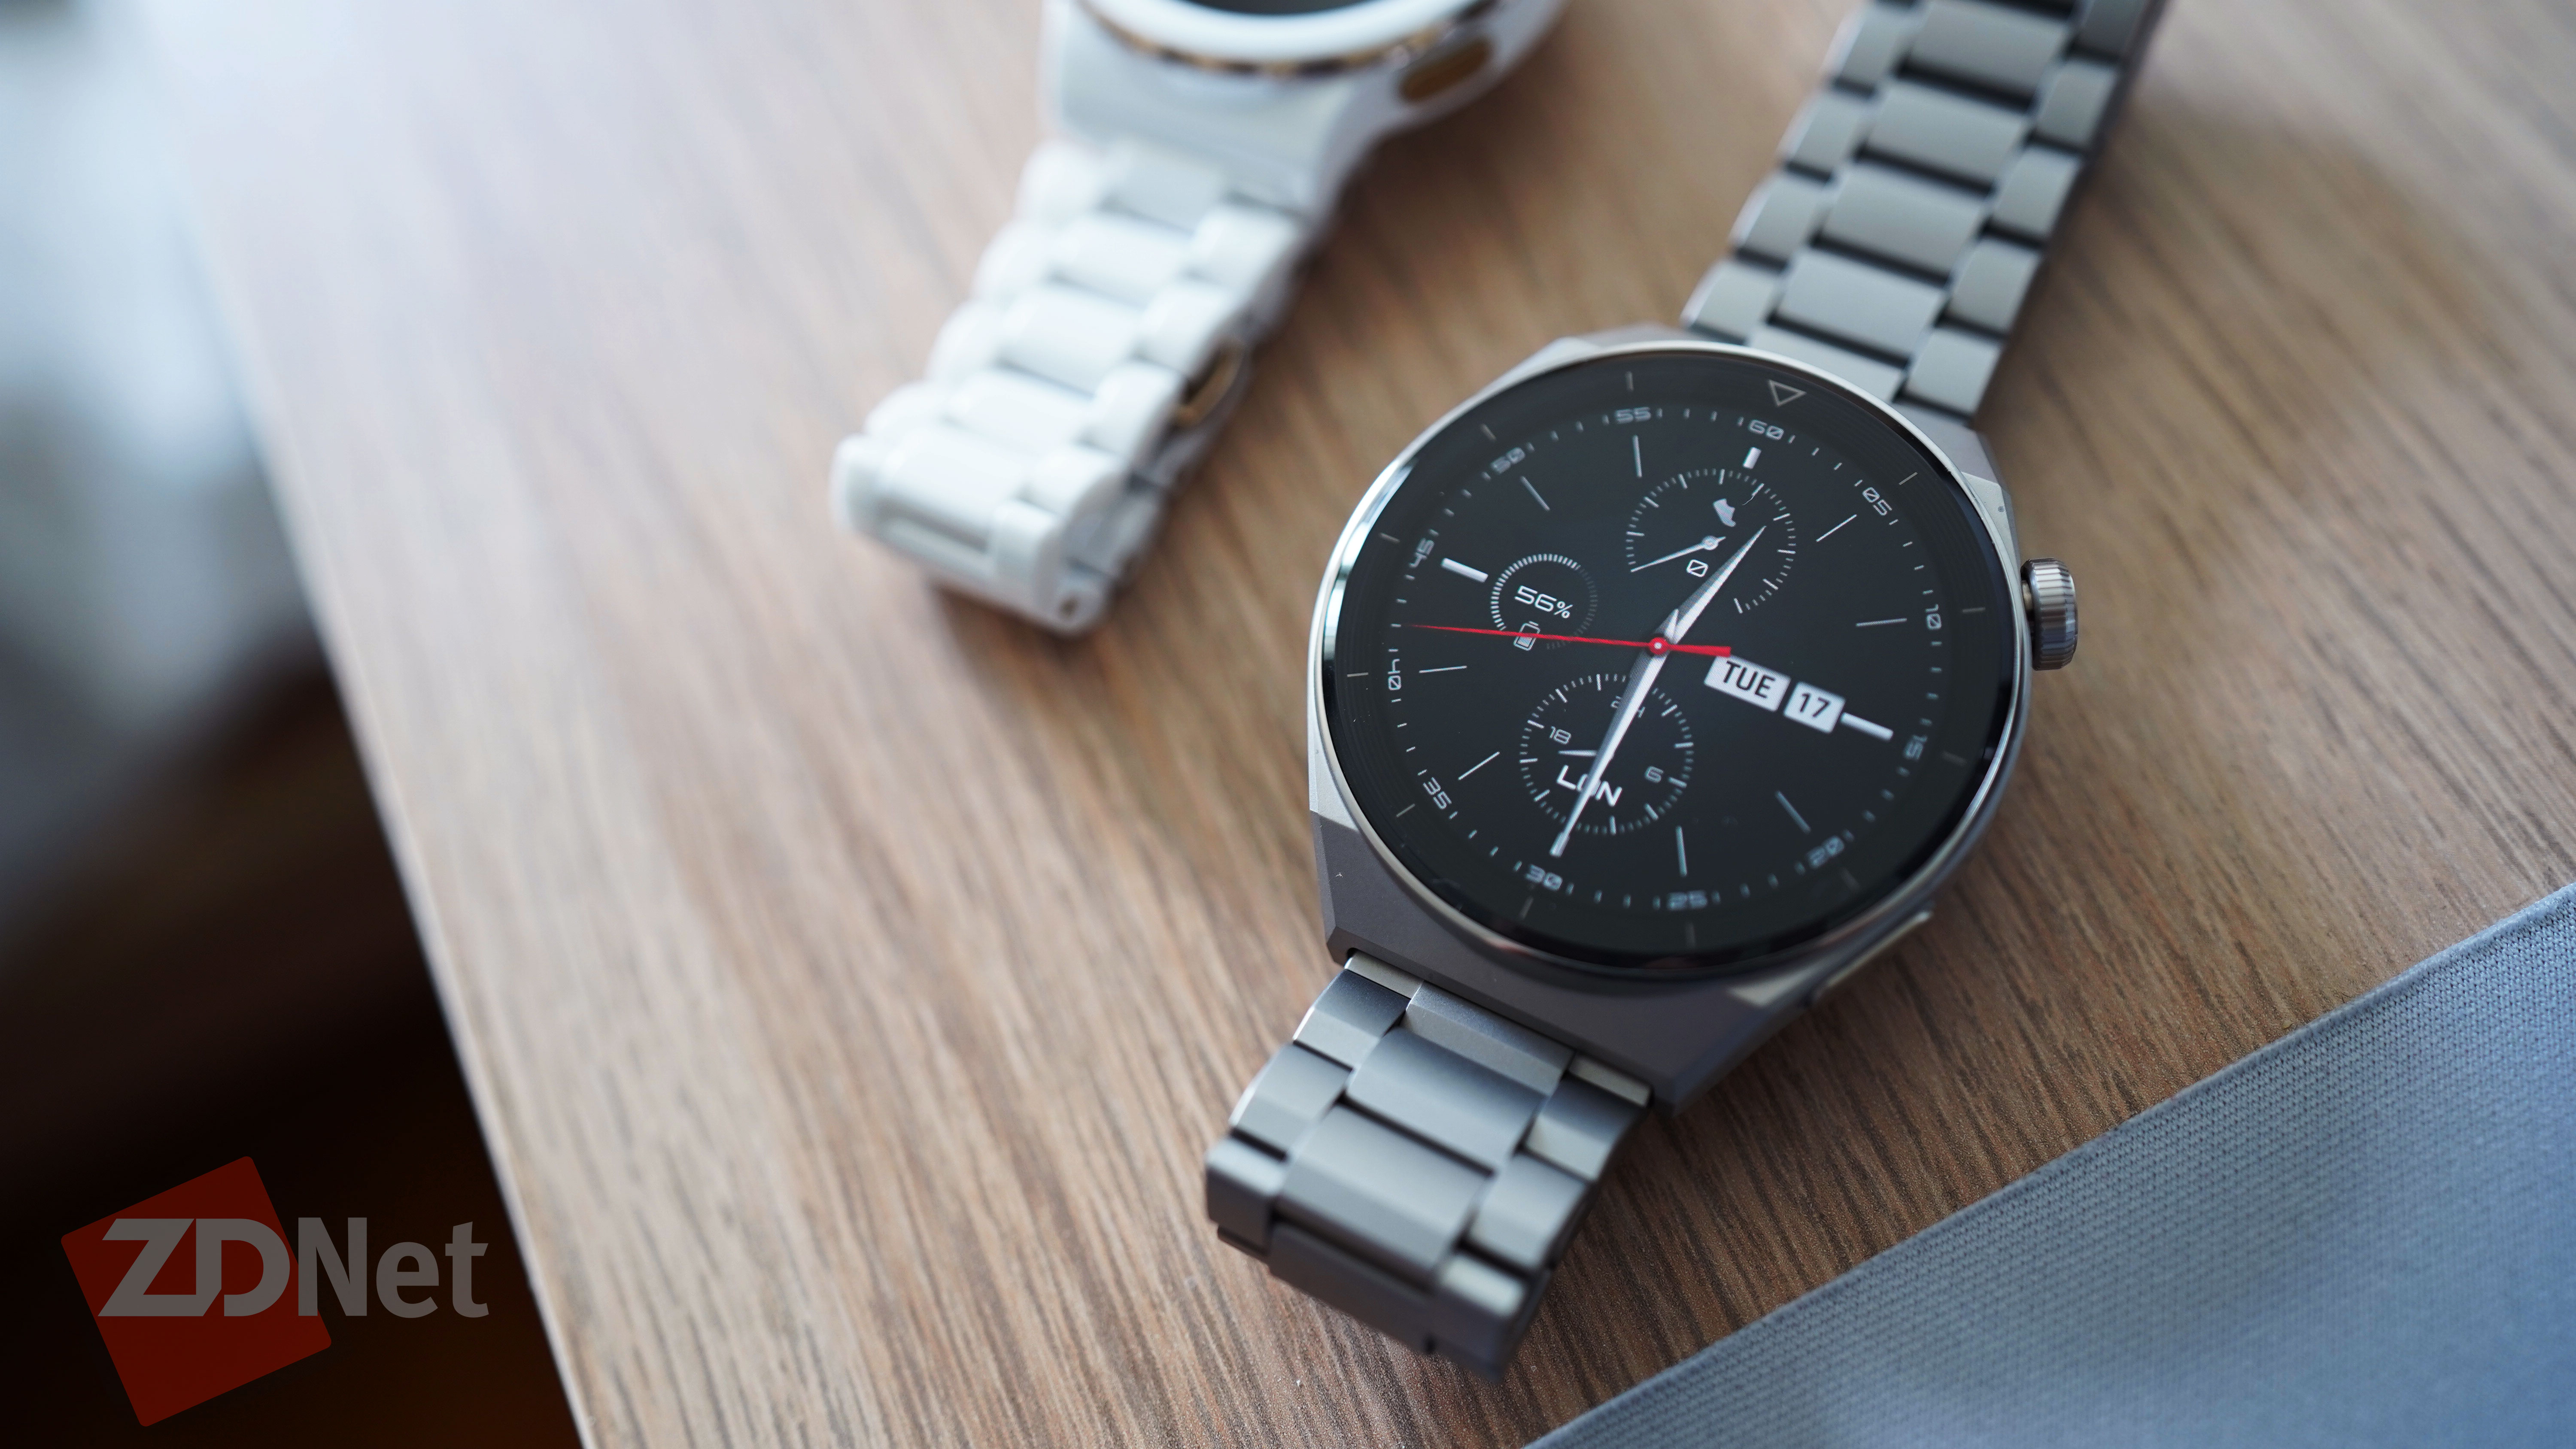 Huawei Watch GT 3 Pro review: A luxurious smartwatch lacking wide appeal